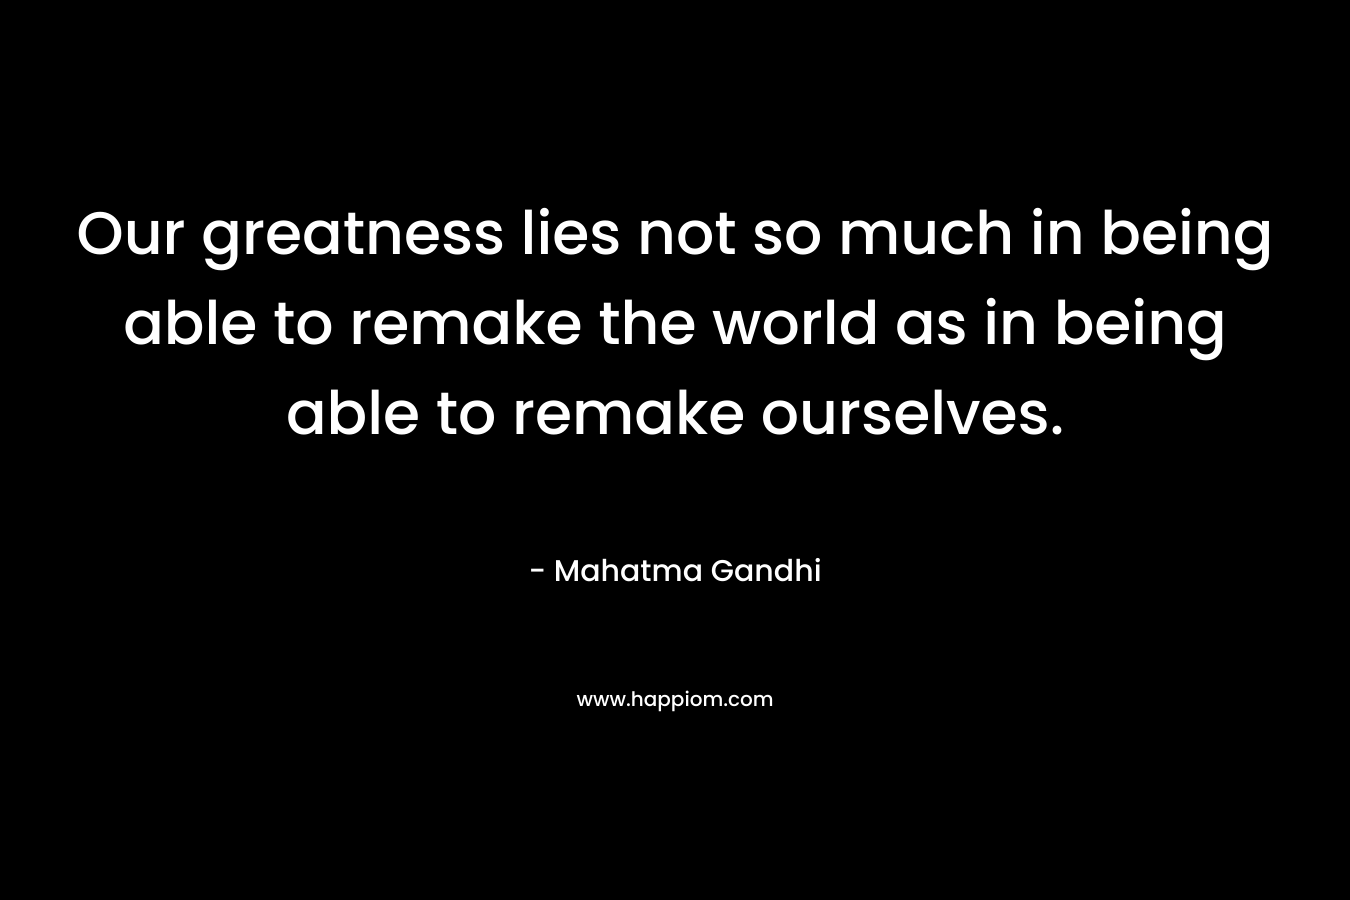 Our greatness lies not so much in being able to remake the world as in being able to remake ourselves. – Mahatma Gandhi